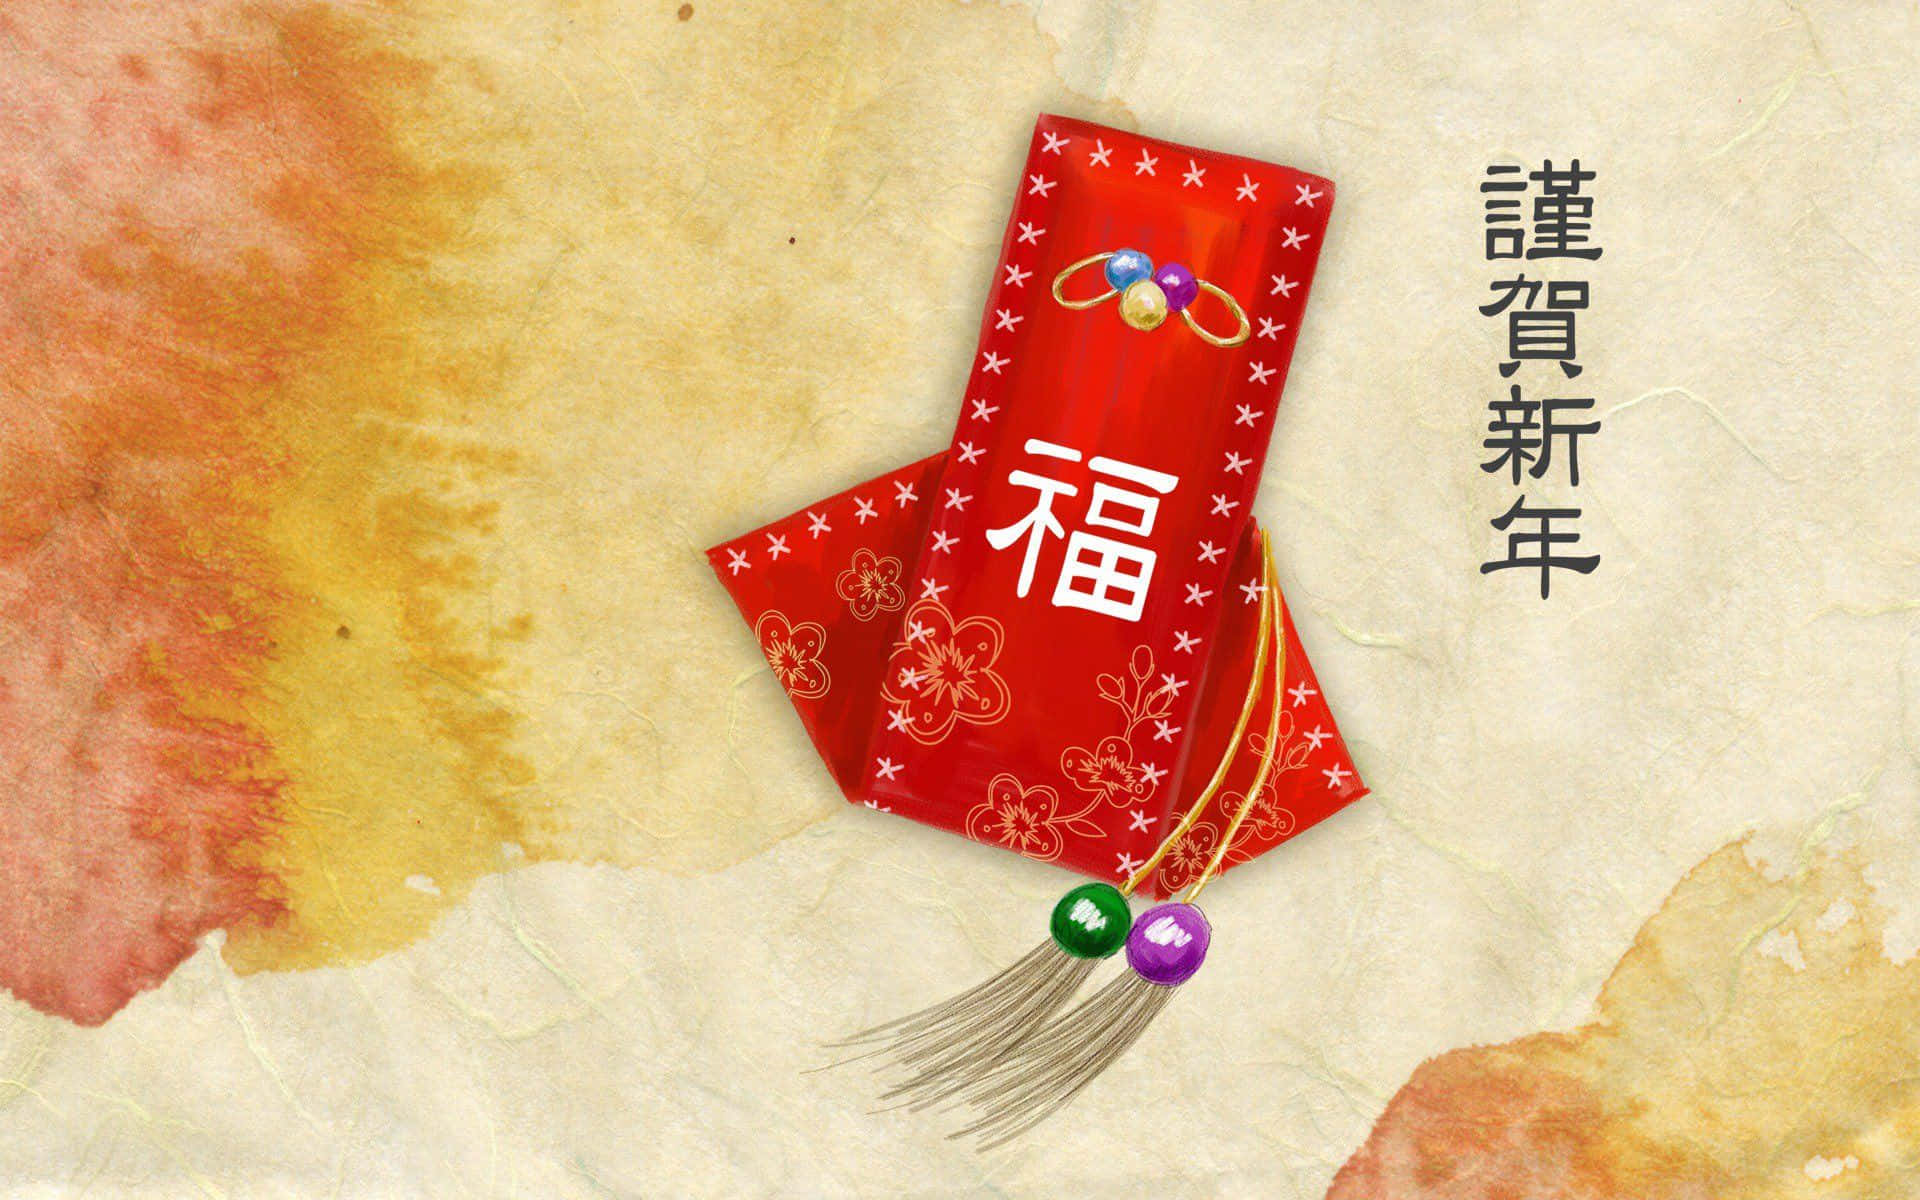 Celebrate the Year of the Rat with Chinese New Year!